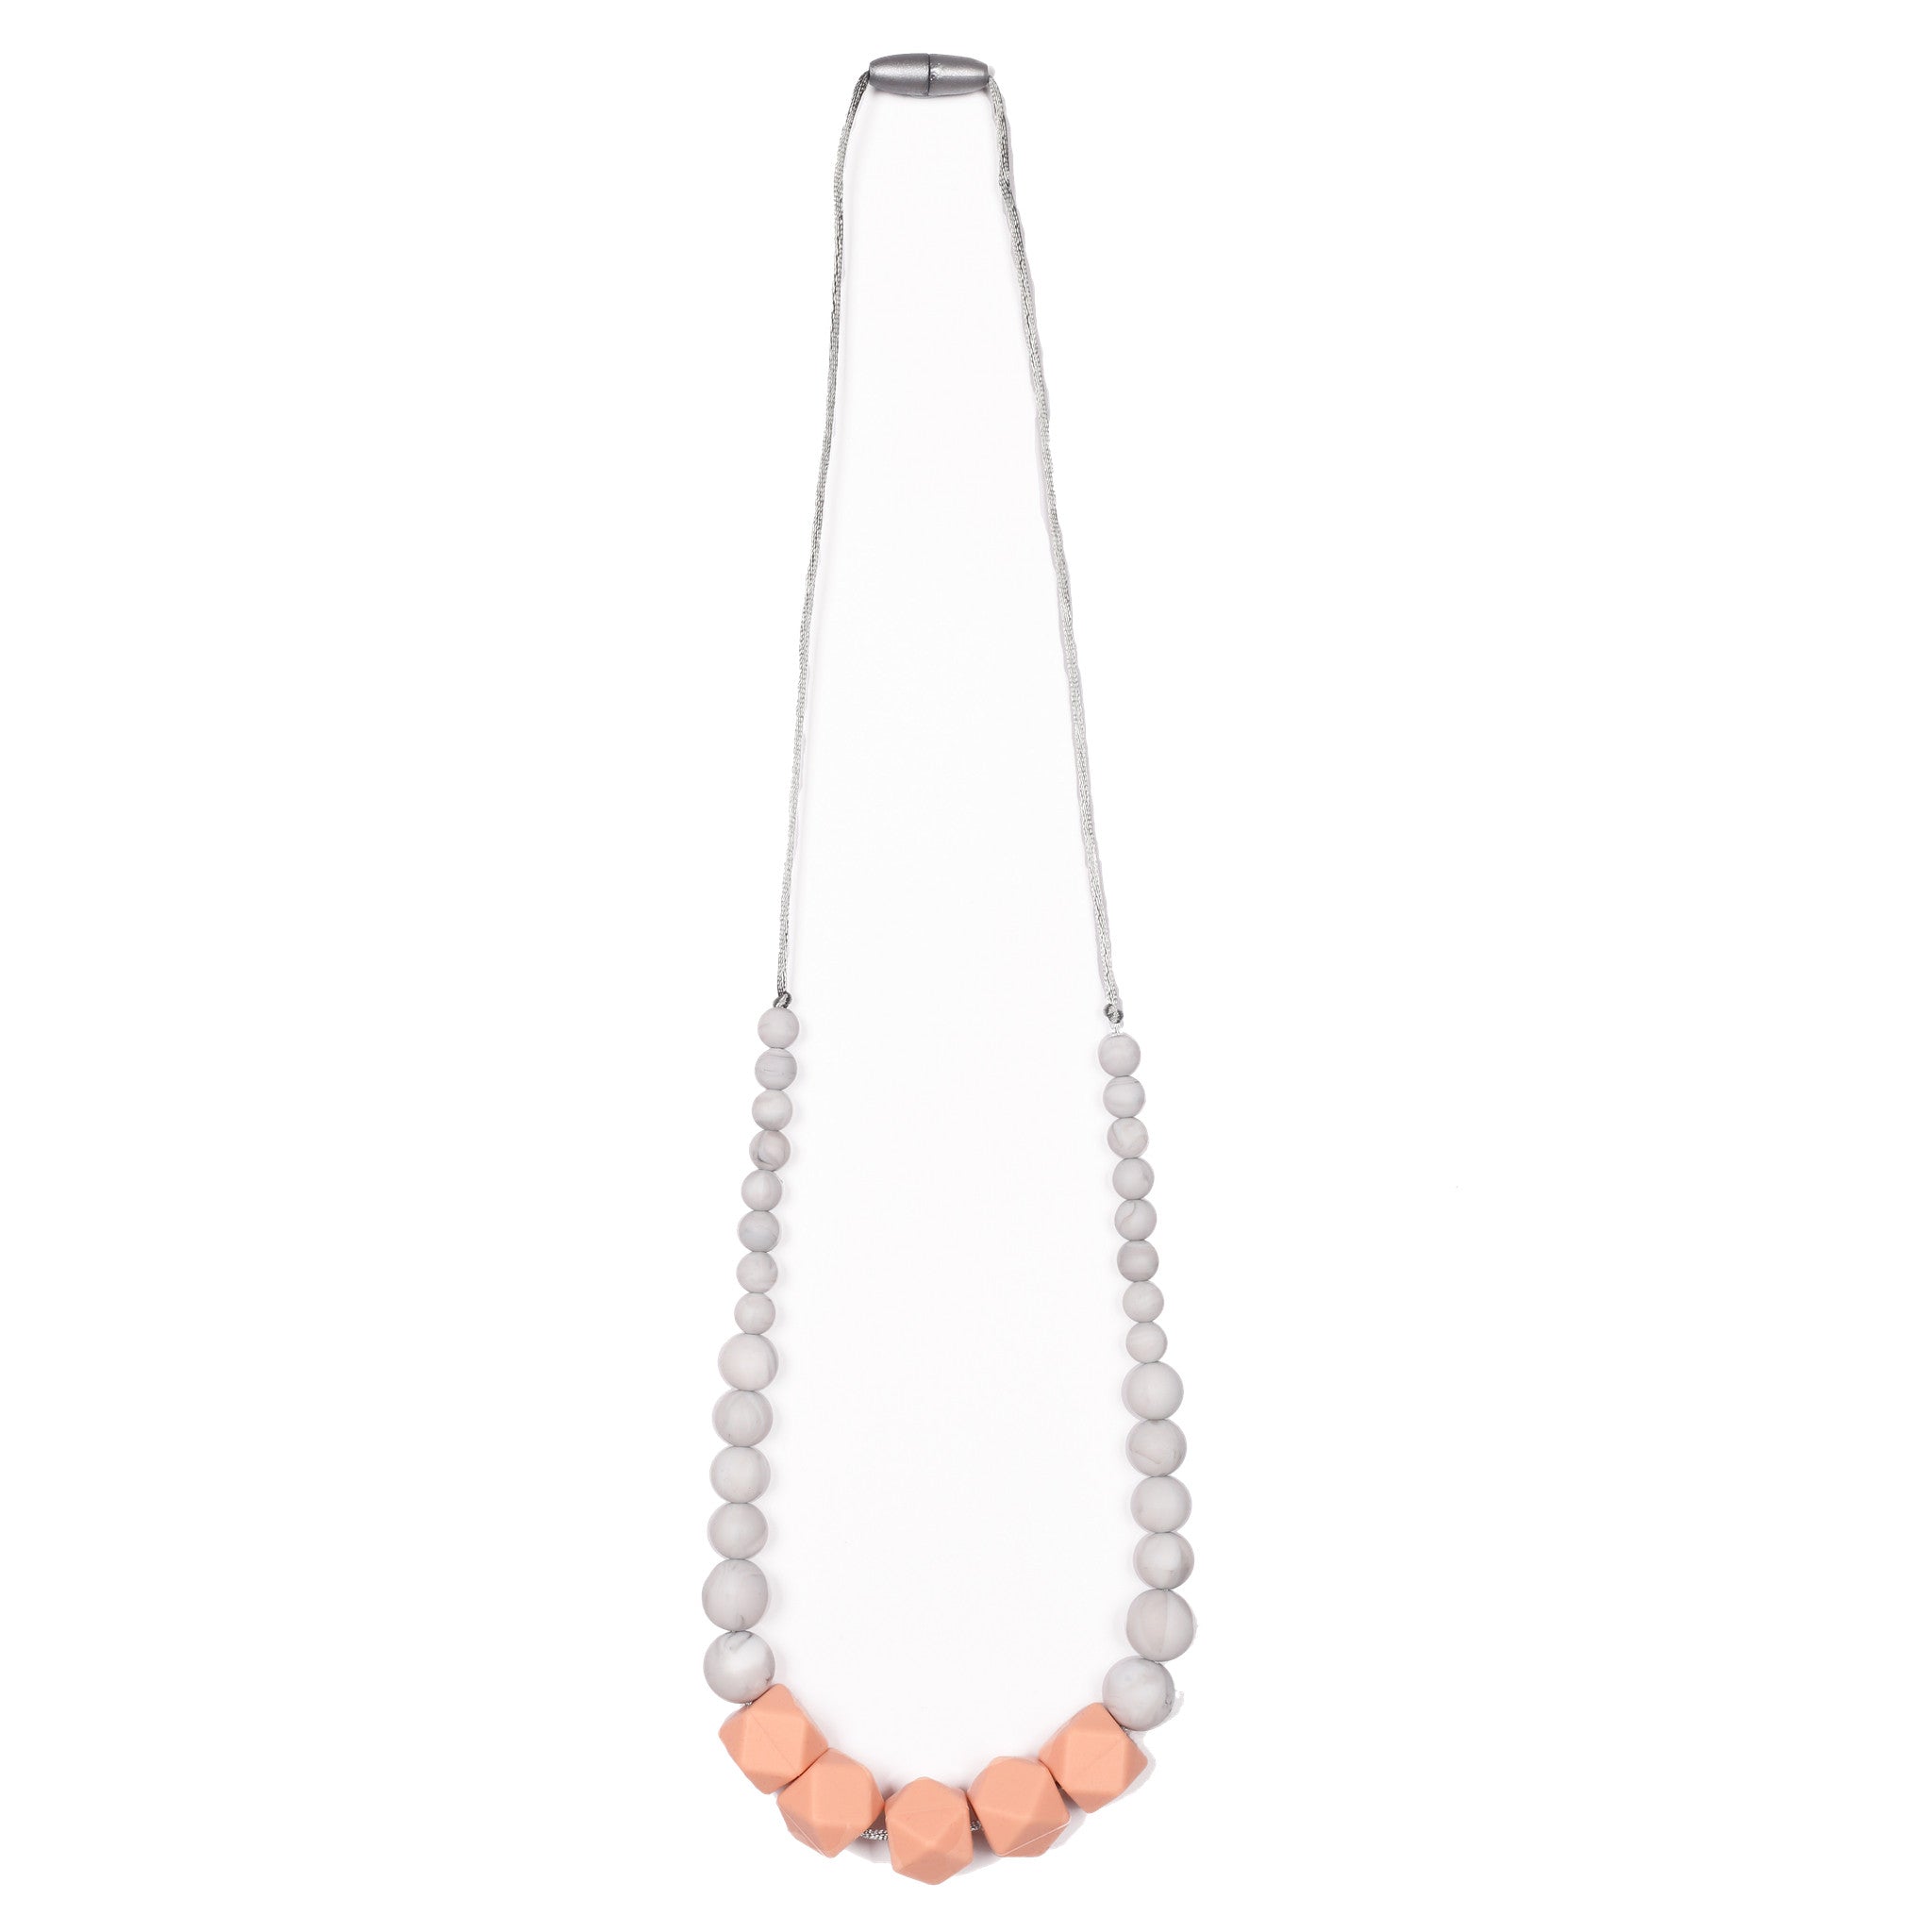 Madison Teething Necklace - Peach/Marble